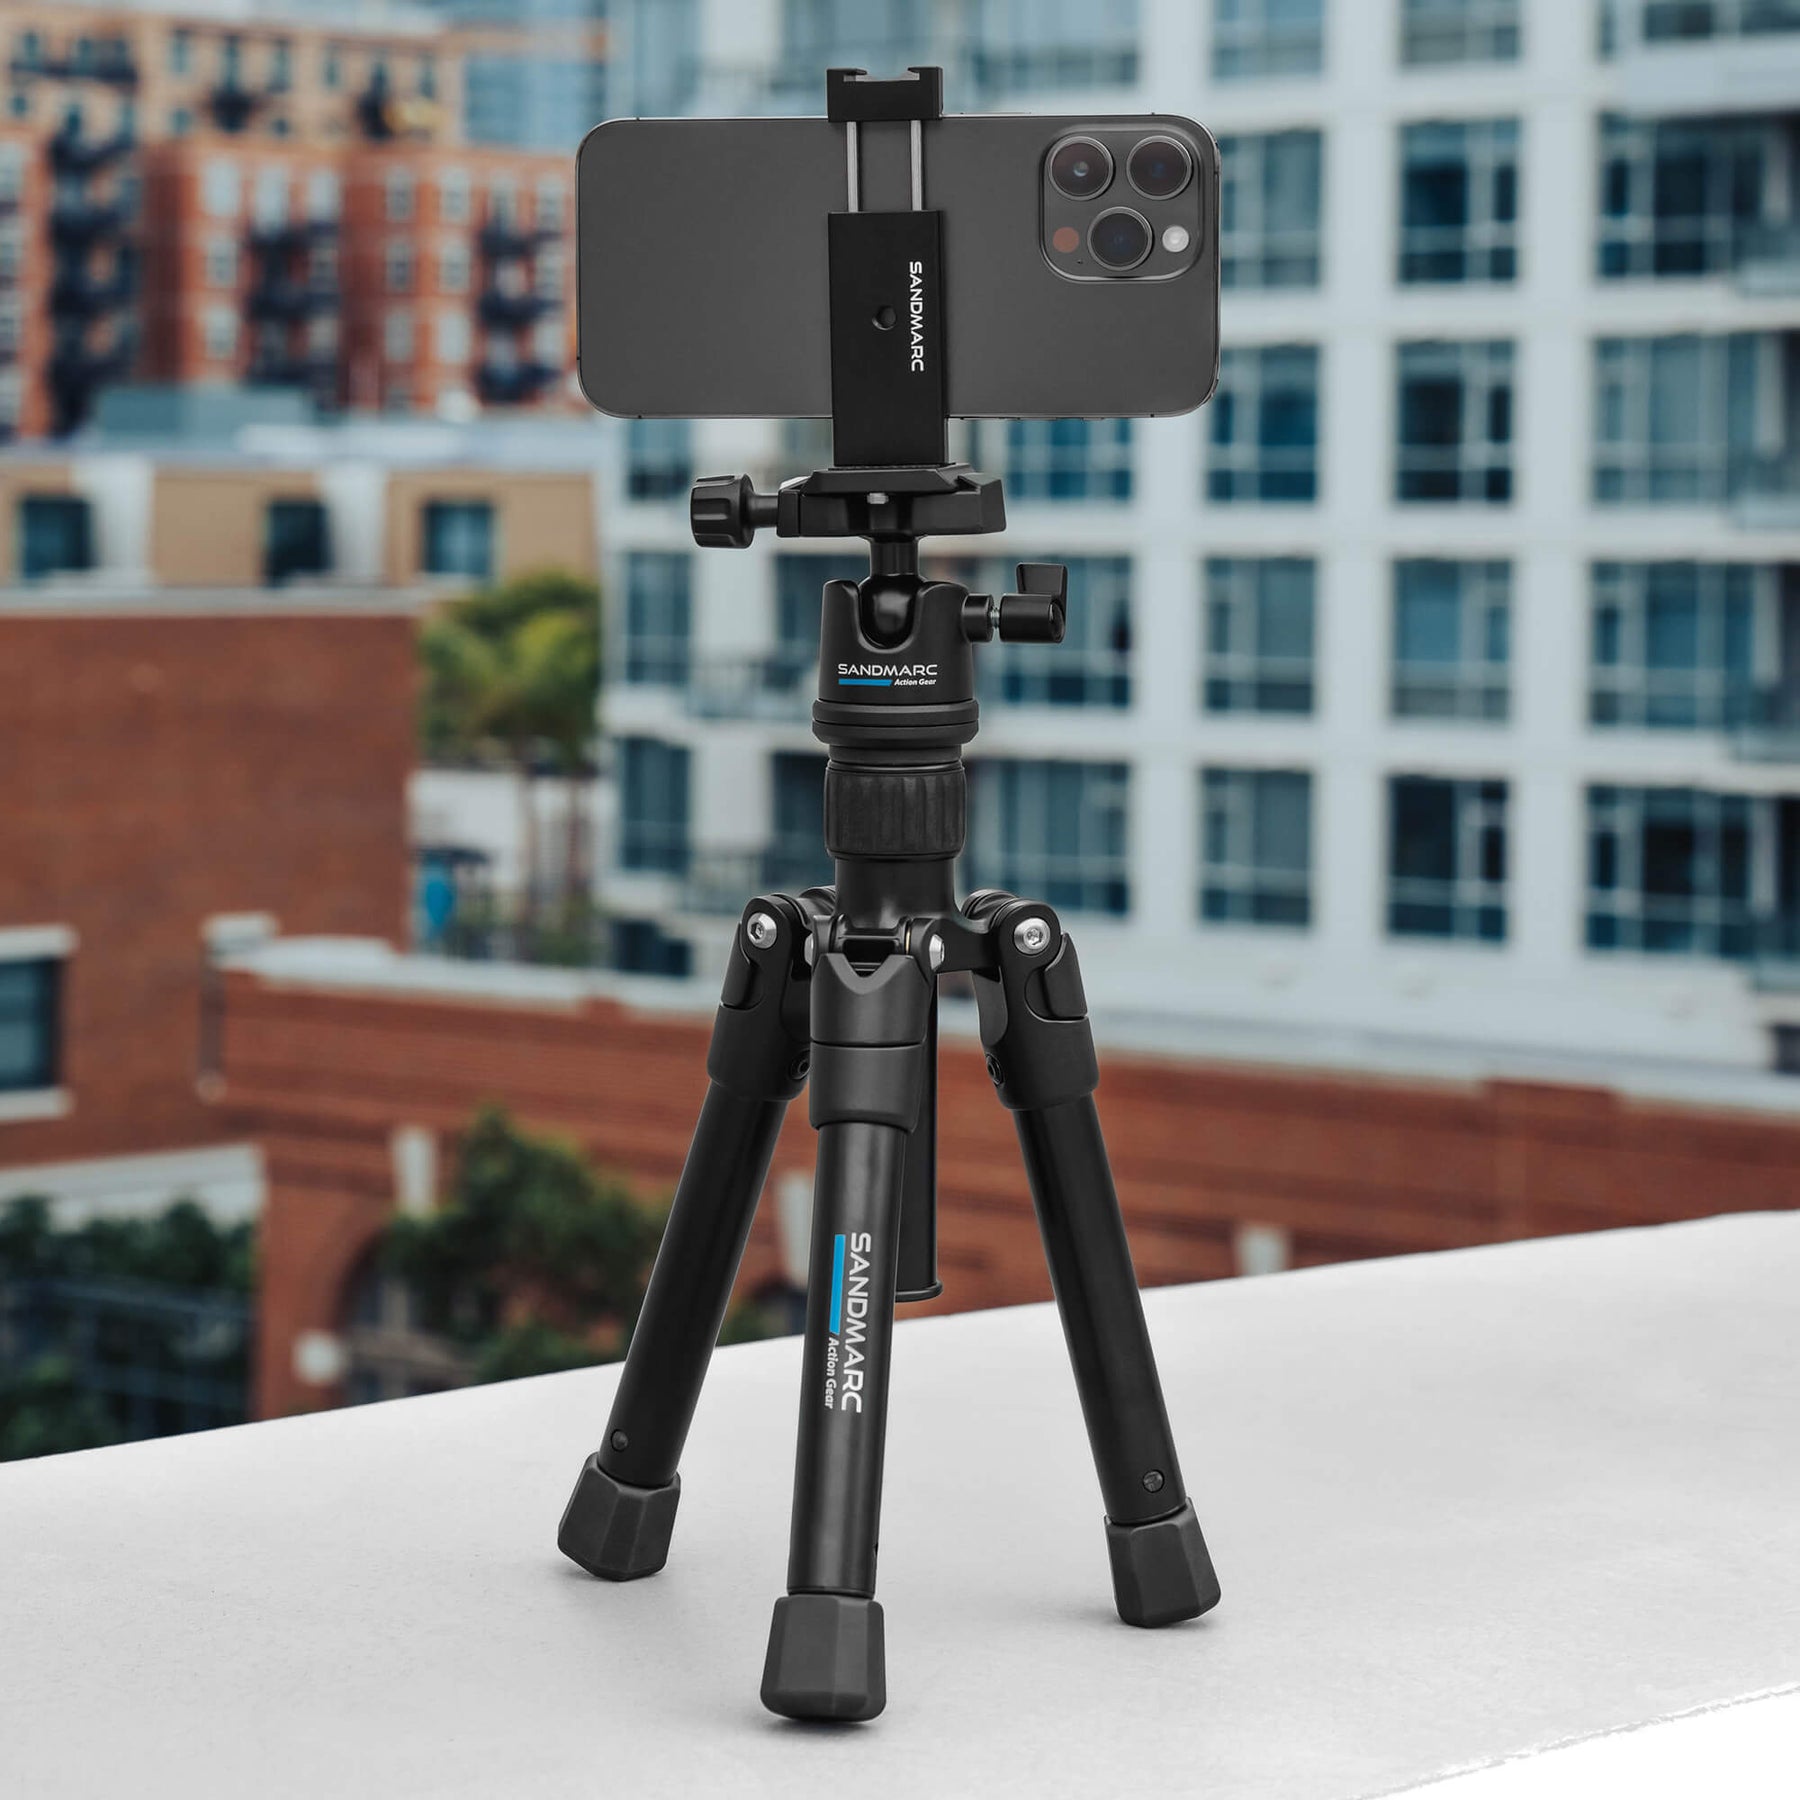 Tripod for iphone • Compare & find best prices today »